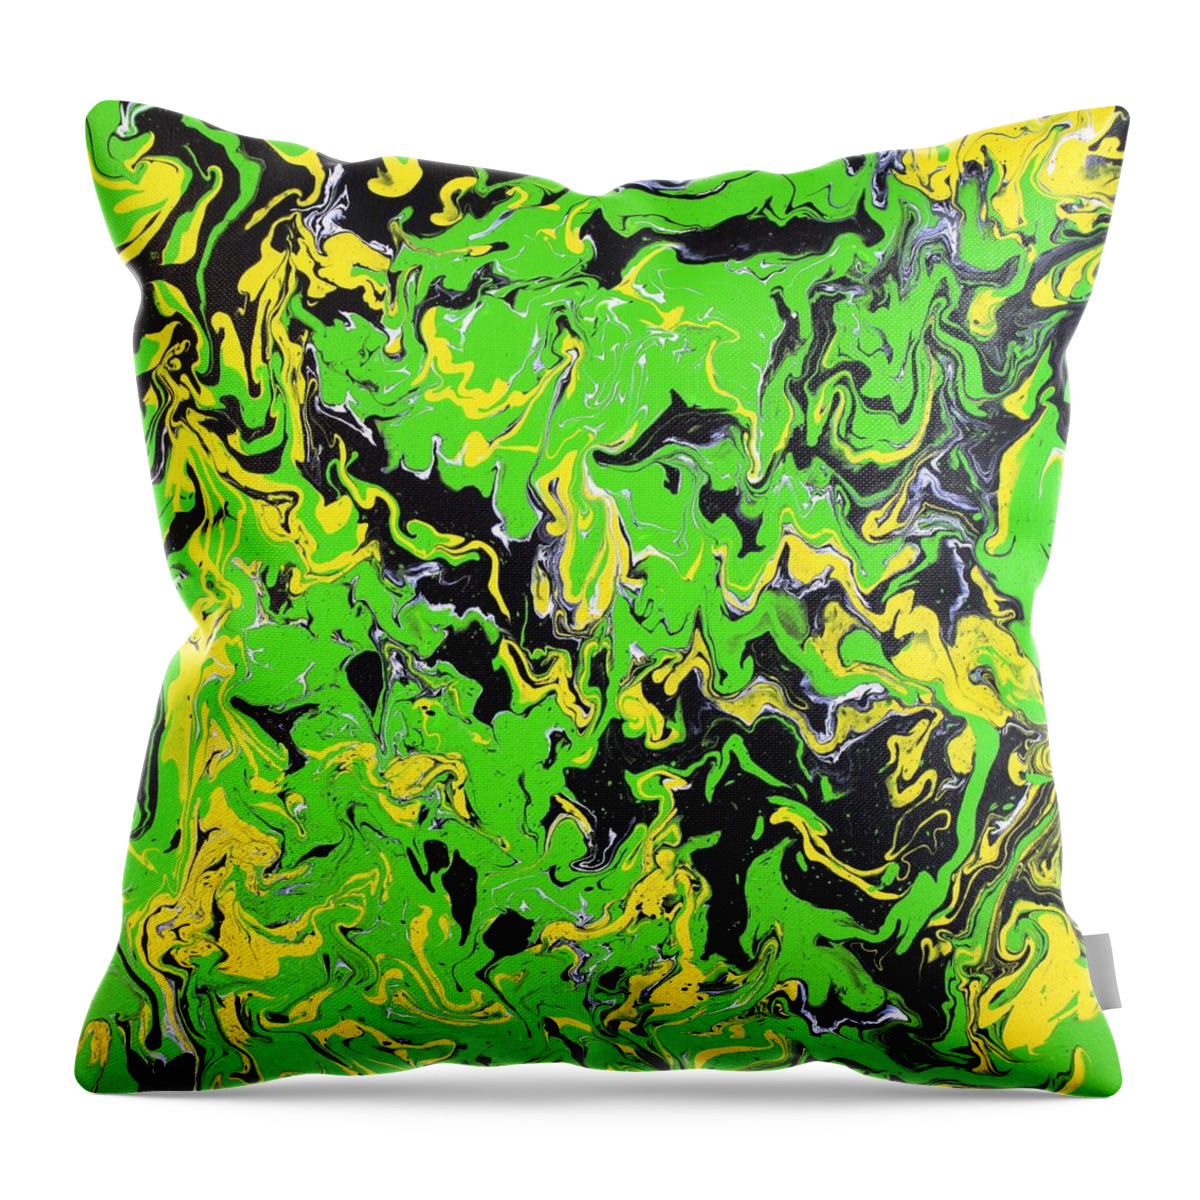  Throw Pillow featuring the painting Future View by Embrace The Matrix